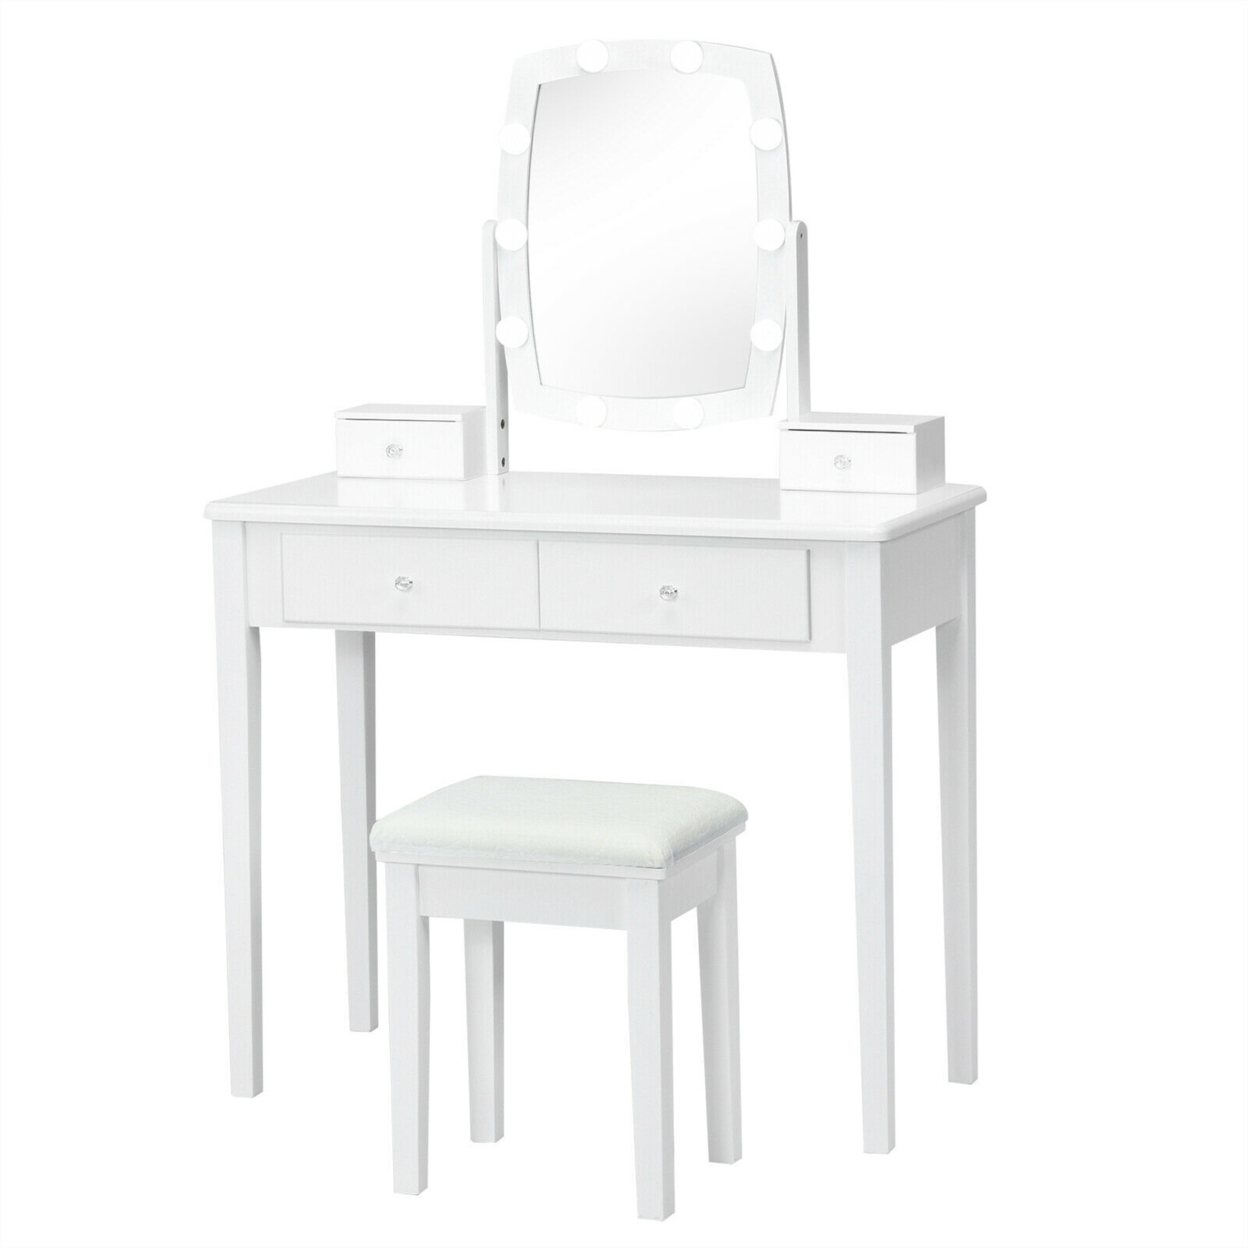 Vanity Table Set With Lighted Mirror Adjustable 10 Bulbs Dresser 4 Drawer - White